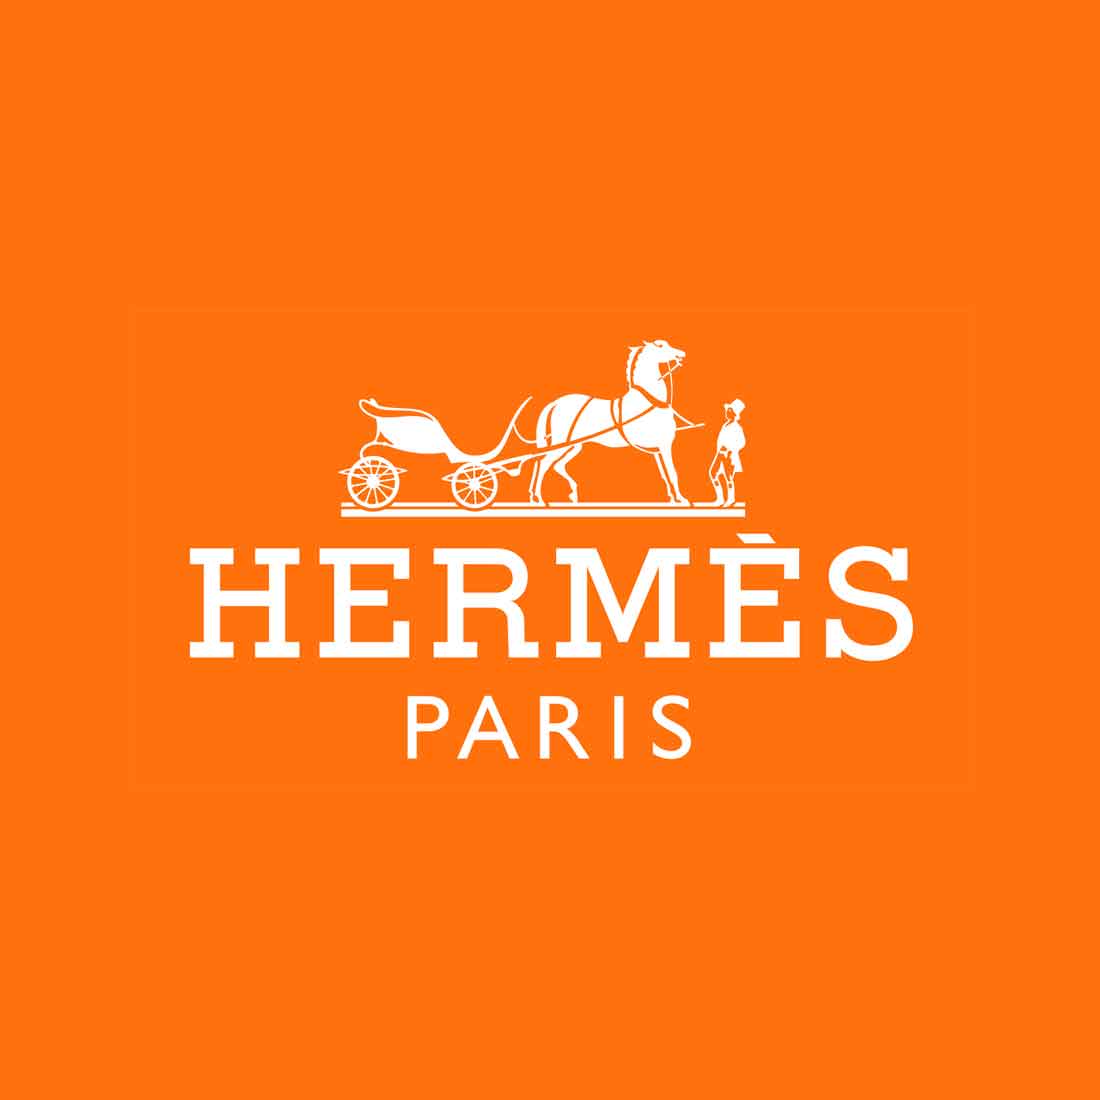 From Carriages to Luxury: The Evolution of the Hermès Logo